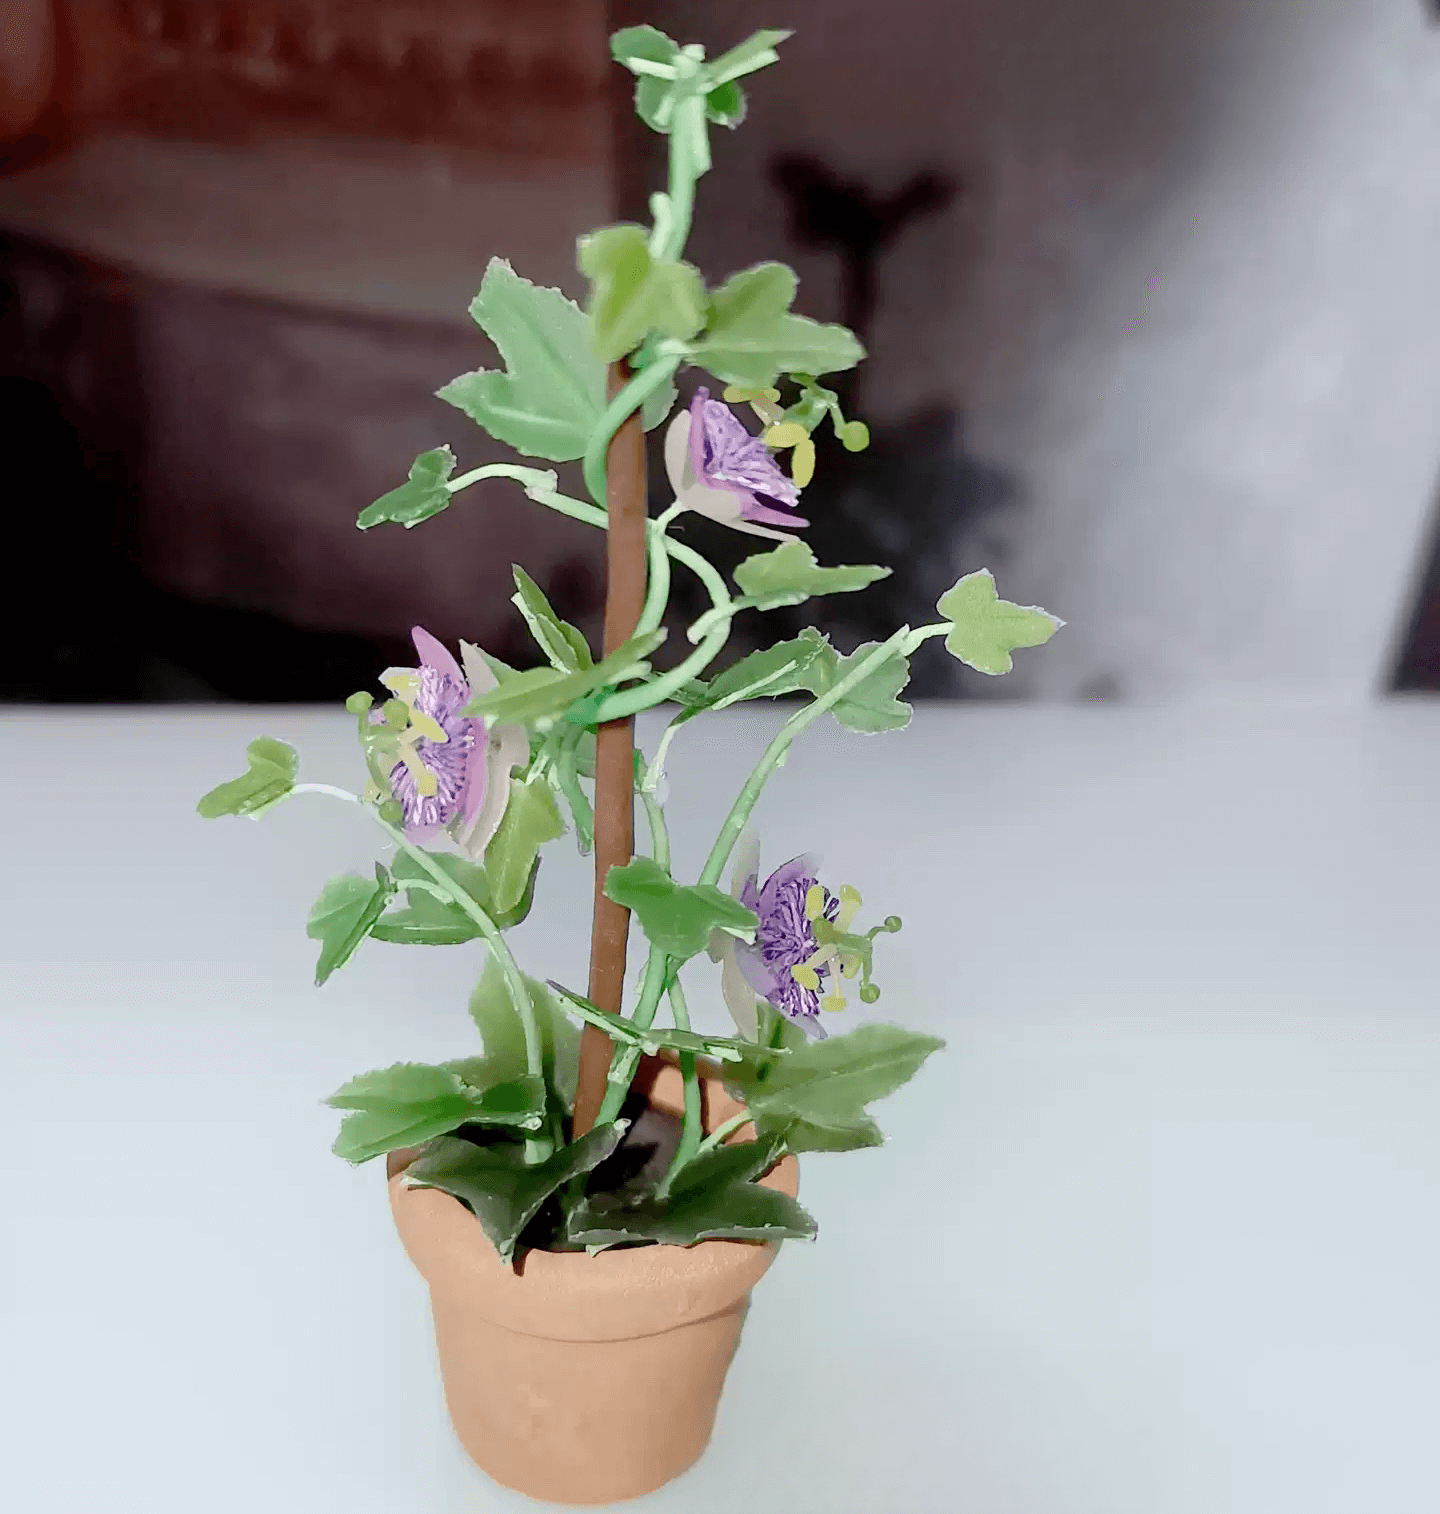 Passion Flower (Passiflora) plants have beautiful, fragrant blooms and are host plants for several butterfly species.  Dollhouse Garden Plants Hand-crafted out of clay for plants lover.